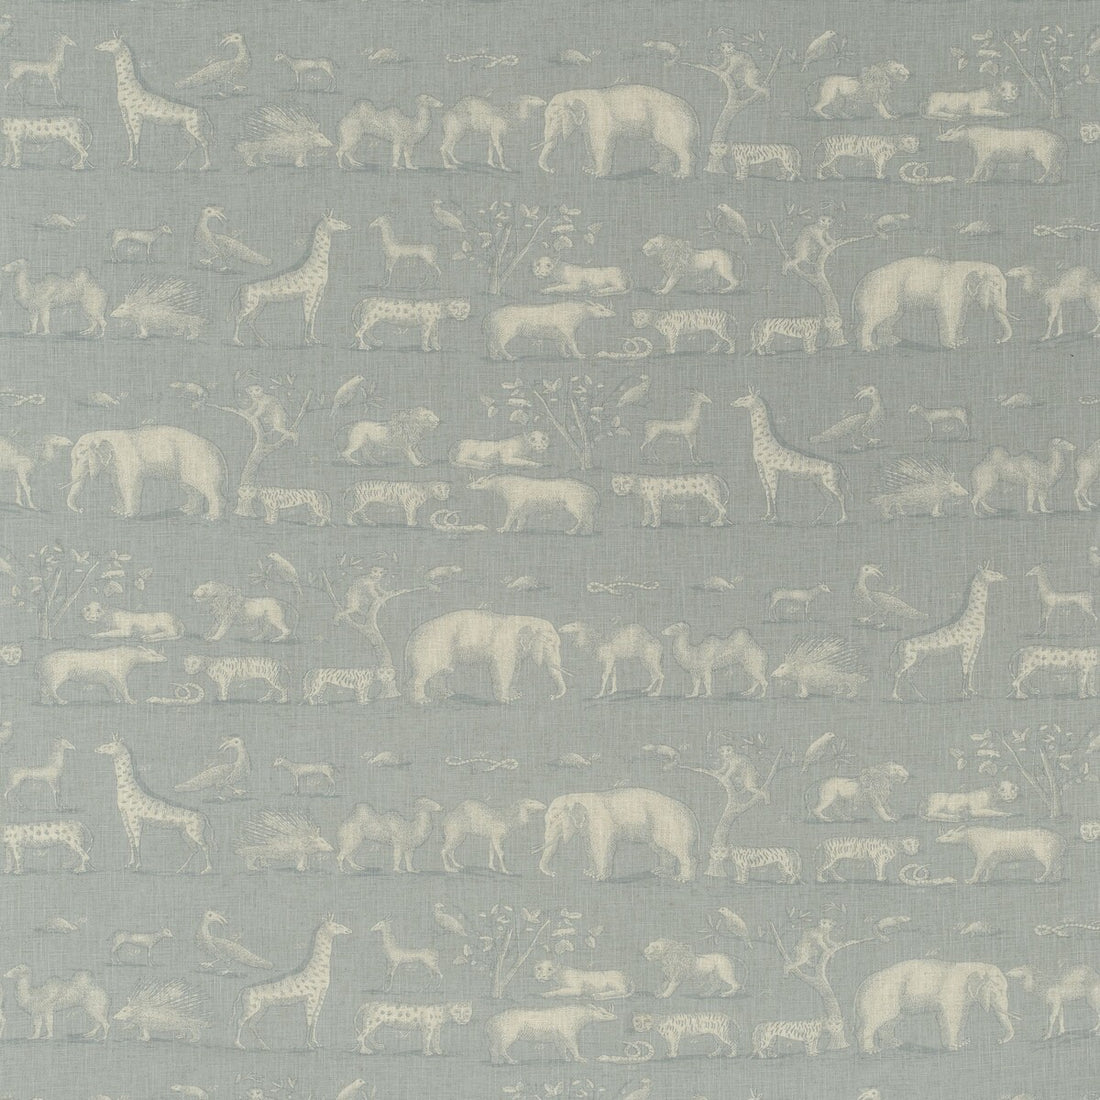 Kingdom fabric in powder color - pattern AM100291.15.0 - by Kravet Couture in the Andrew Martin Expedition collection